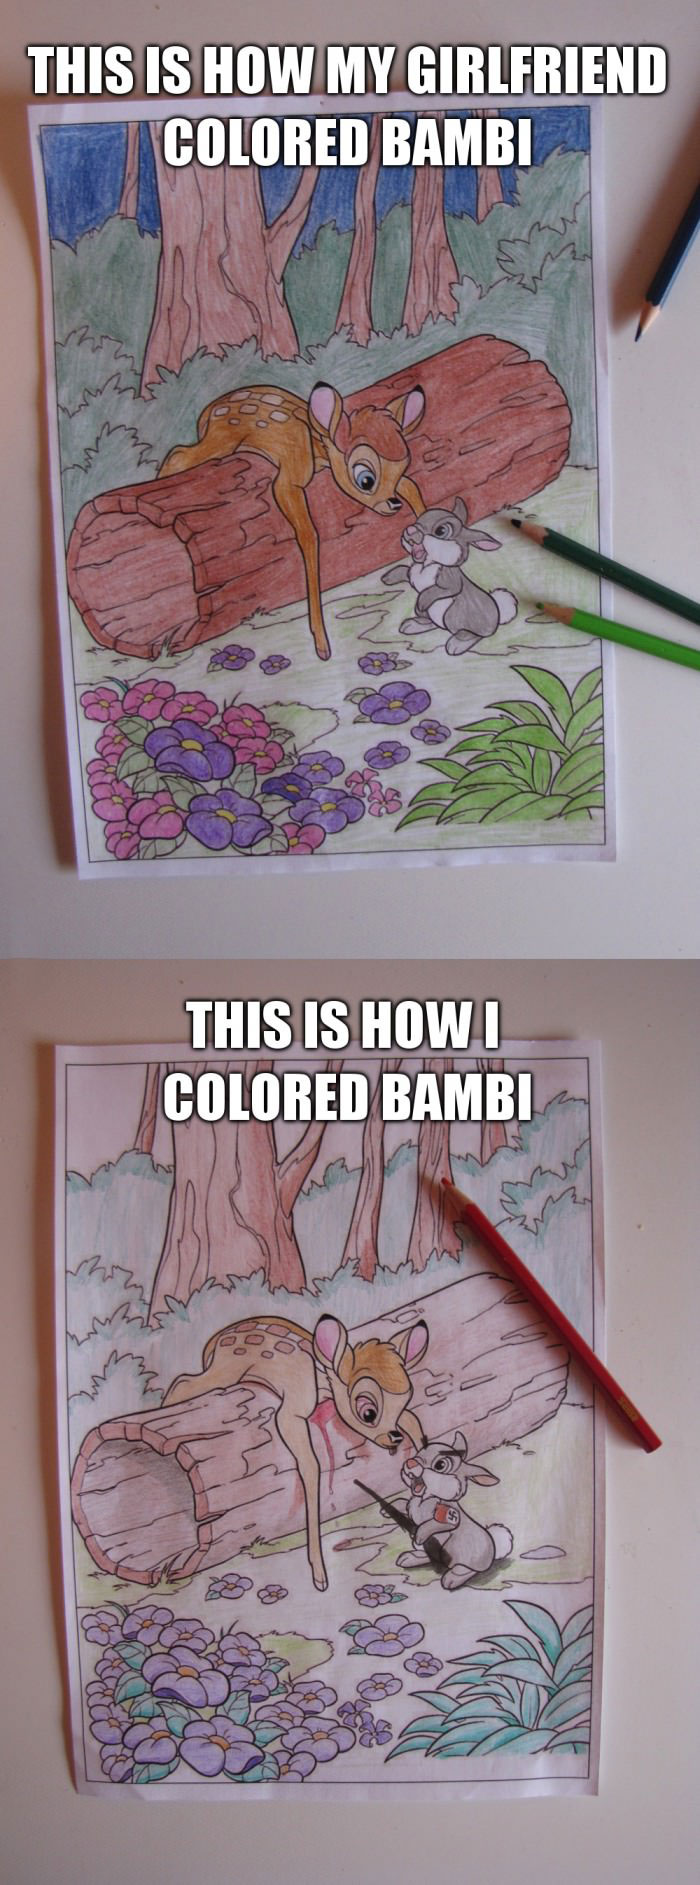 this is how my girlfriend coloured bambi, this is how i coloured bambi, lol, dark humour